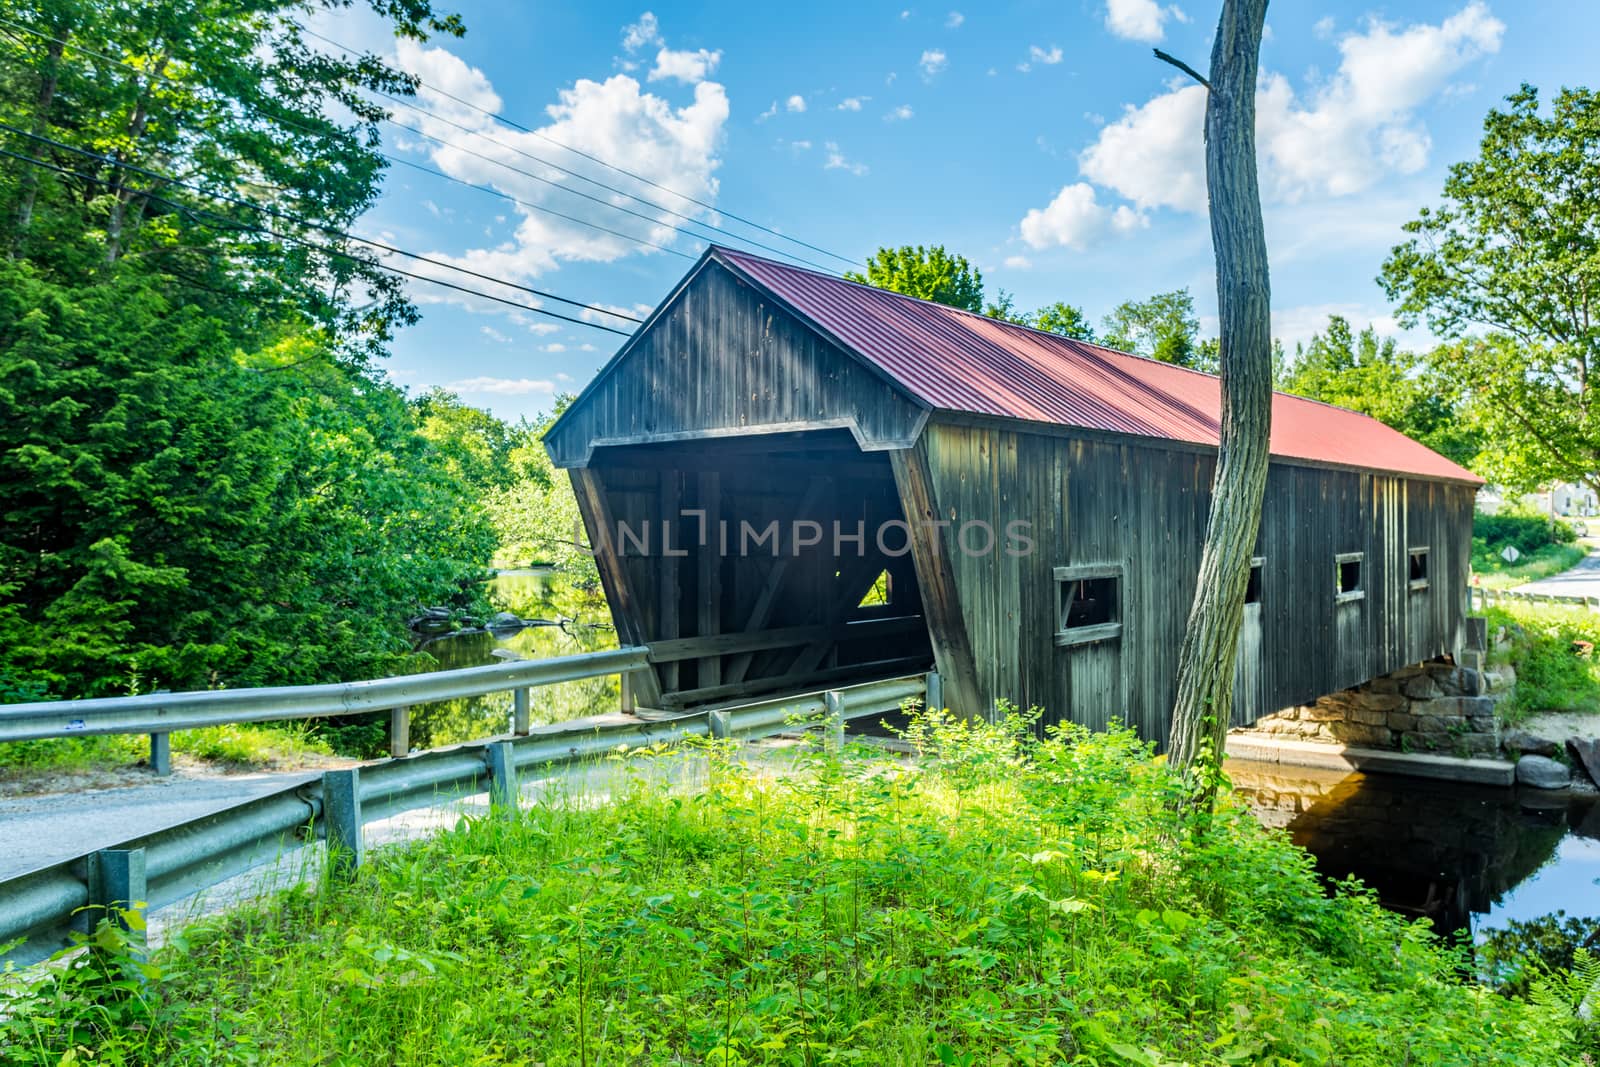 The Dalton Covered Bridge is a historic covered bridge that carries Joppa Road over the Warner River in Warner, New Hampshire.